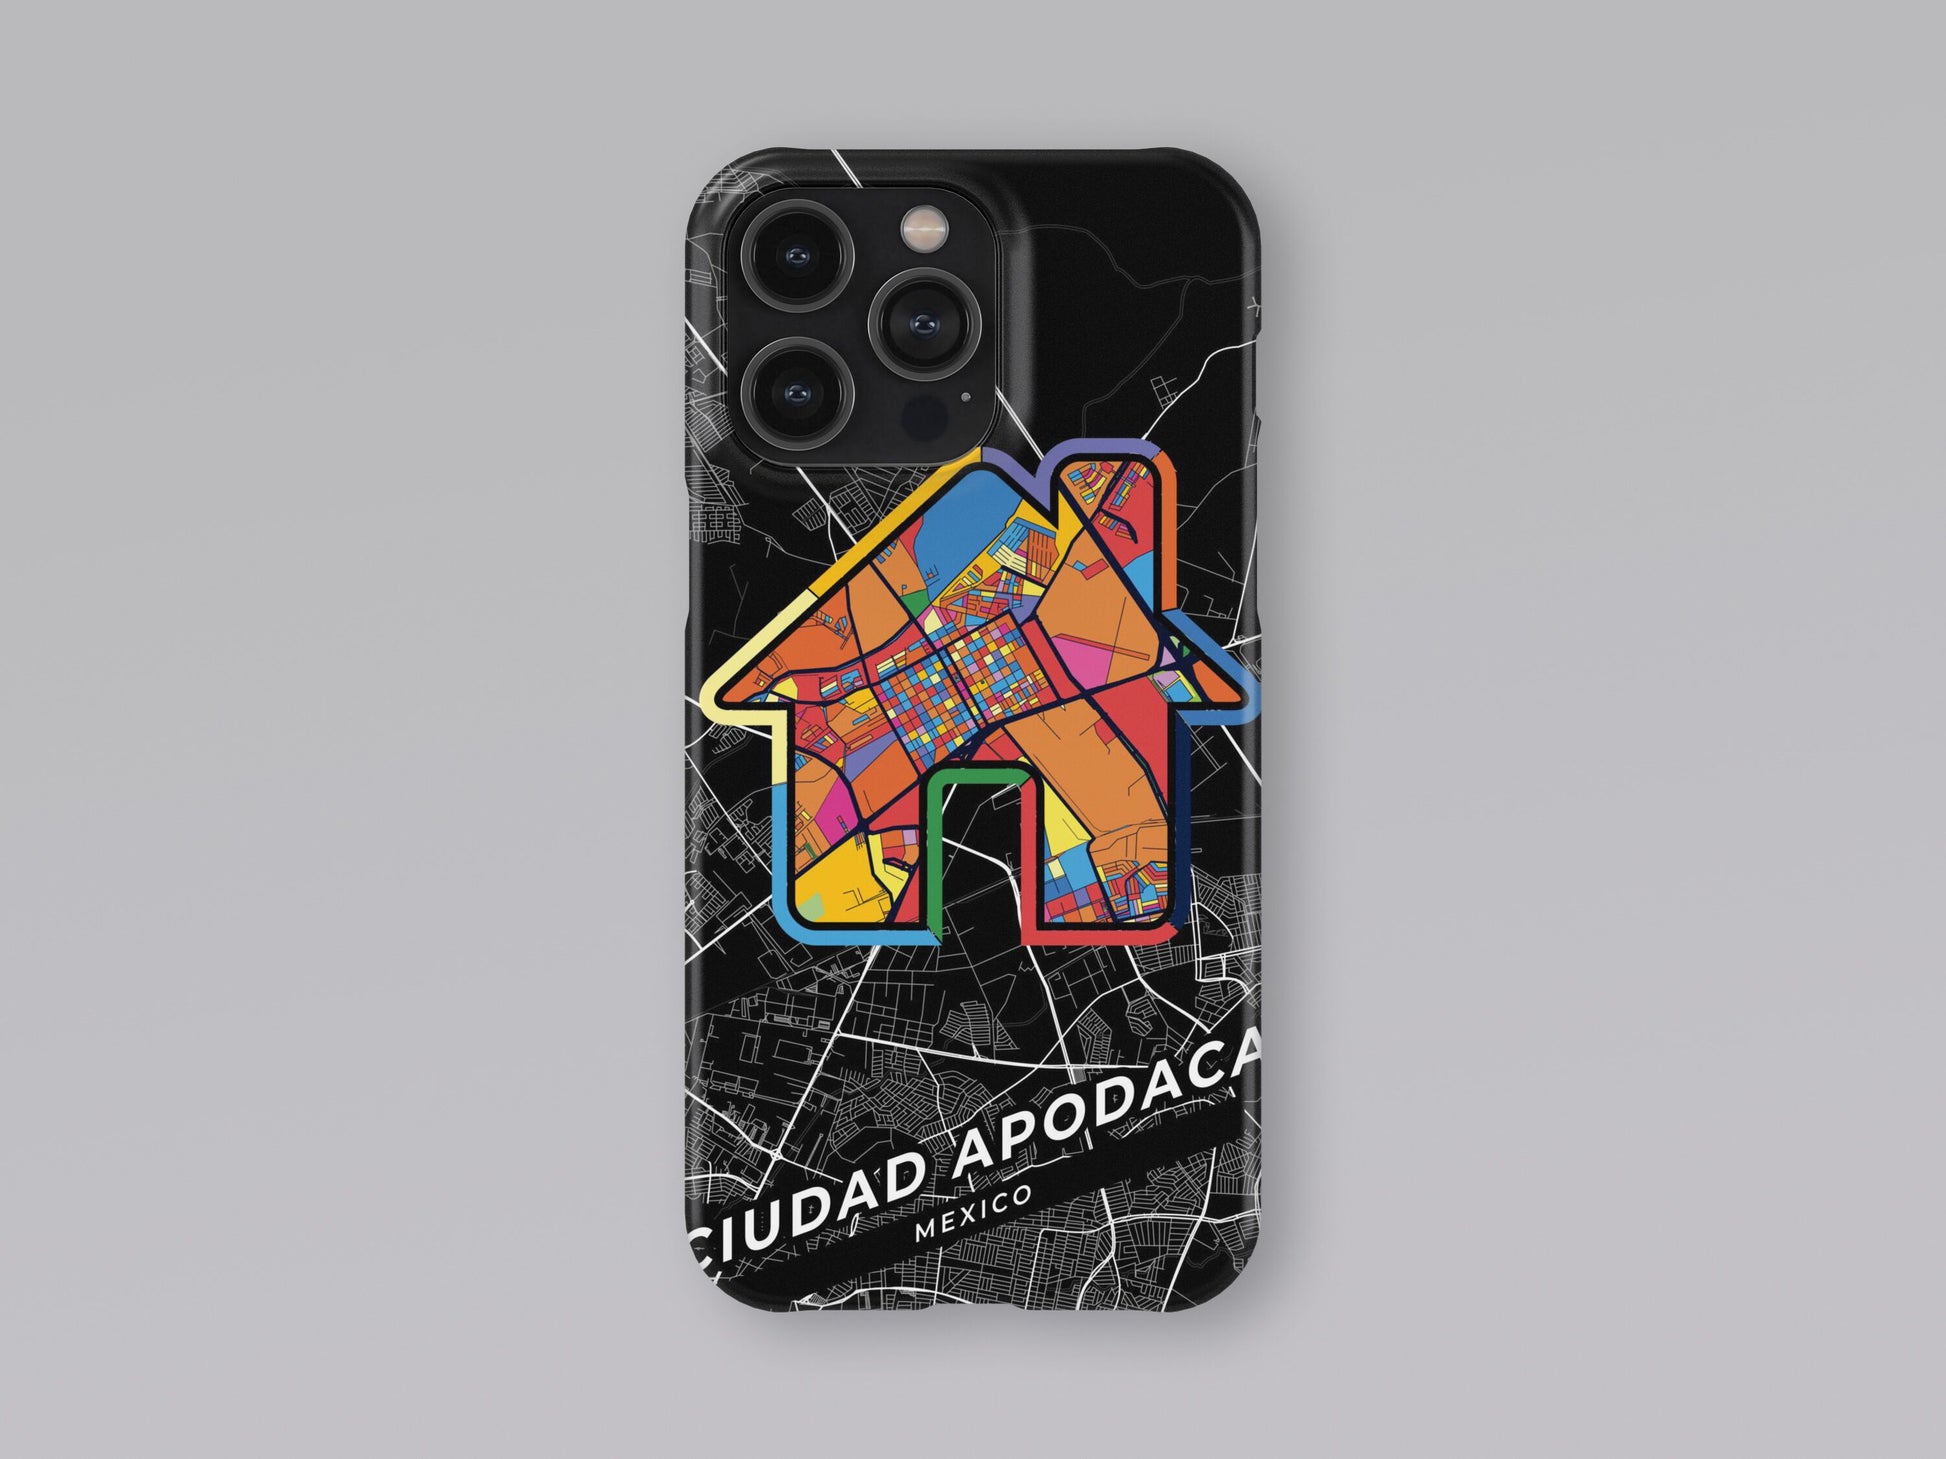 Ciudad Apodaca Mexico slim phone case with colorful icon. Birthday, wedding or housewarming gift. Couple match cases. 3